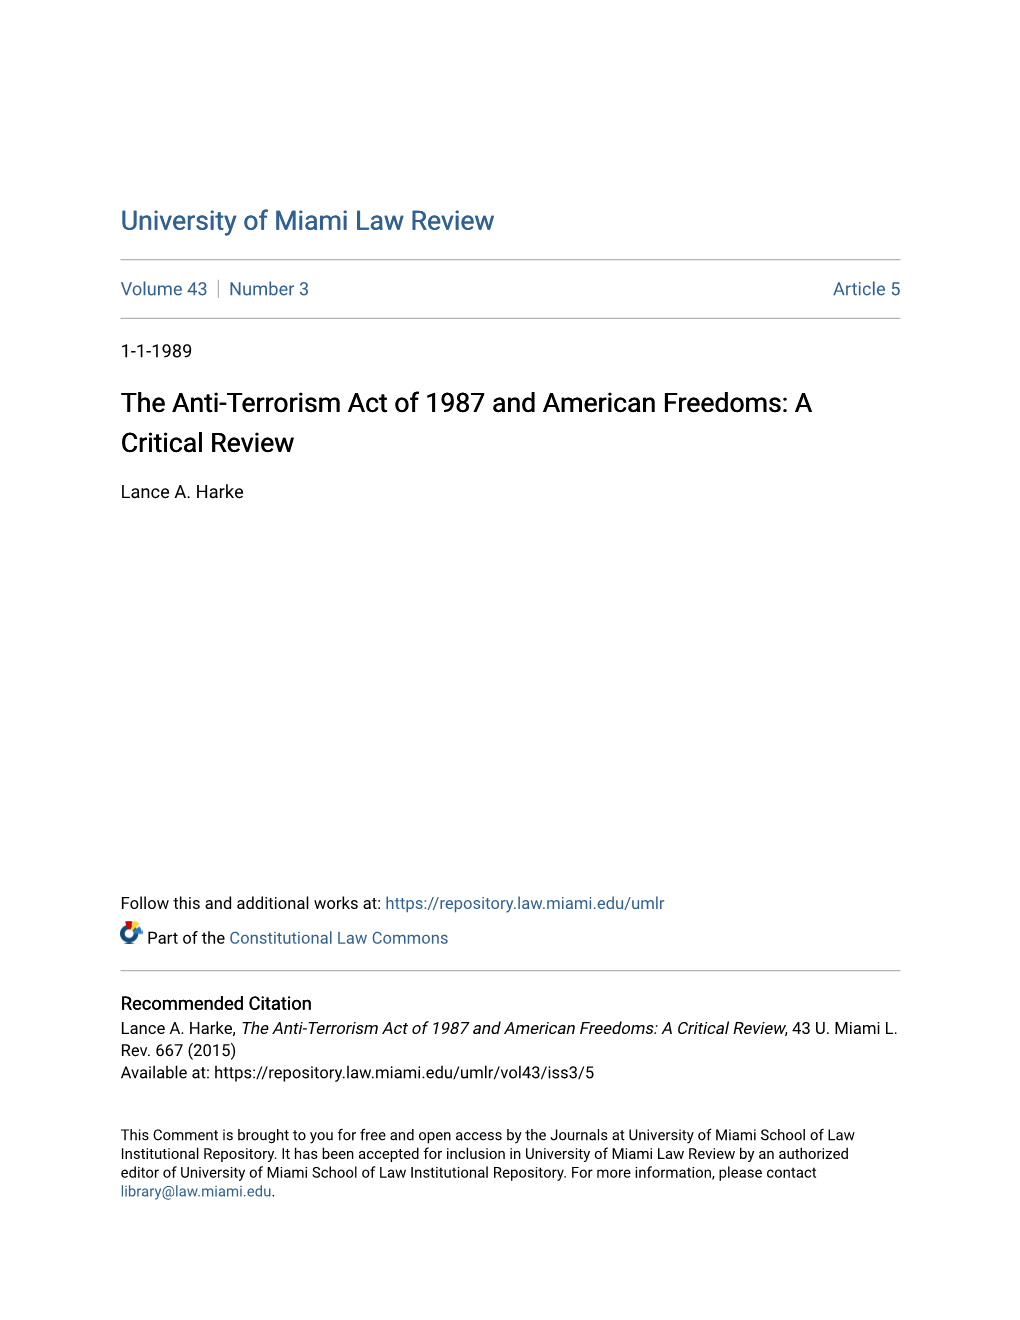 The Anti-Terrorism Act of 1987 and American Freedoms: a Critical Review